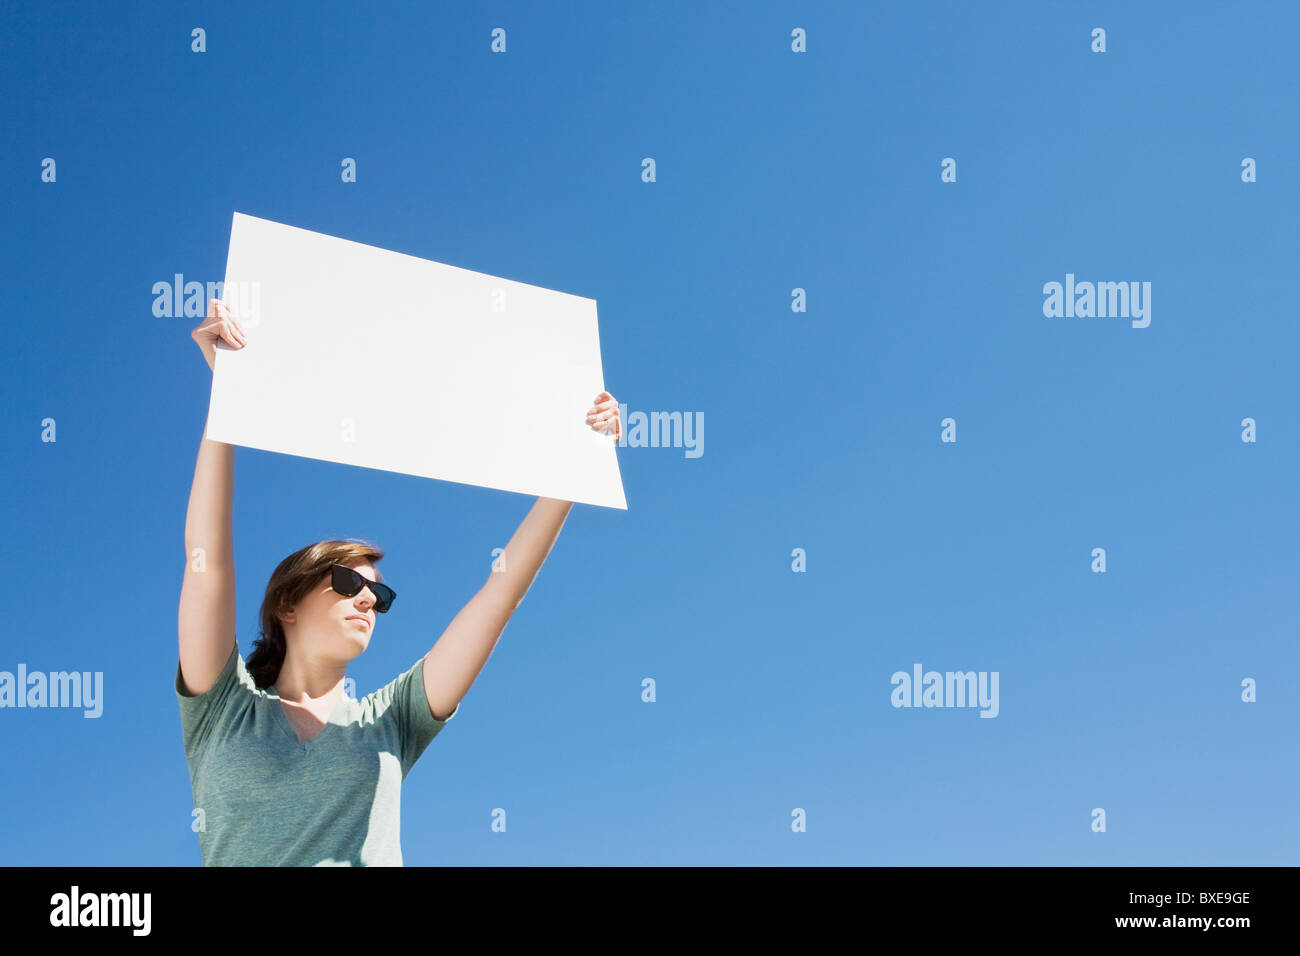 Young woman holding a blank placard Stock Photo